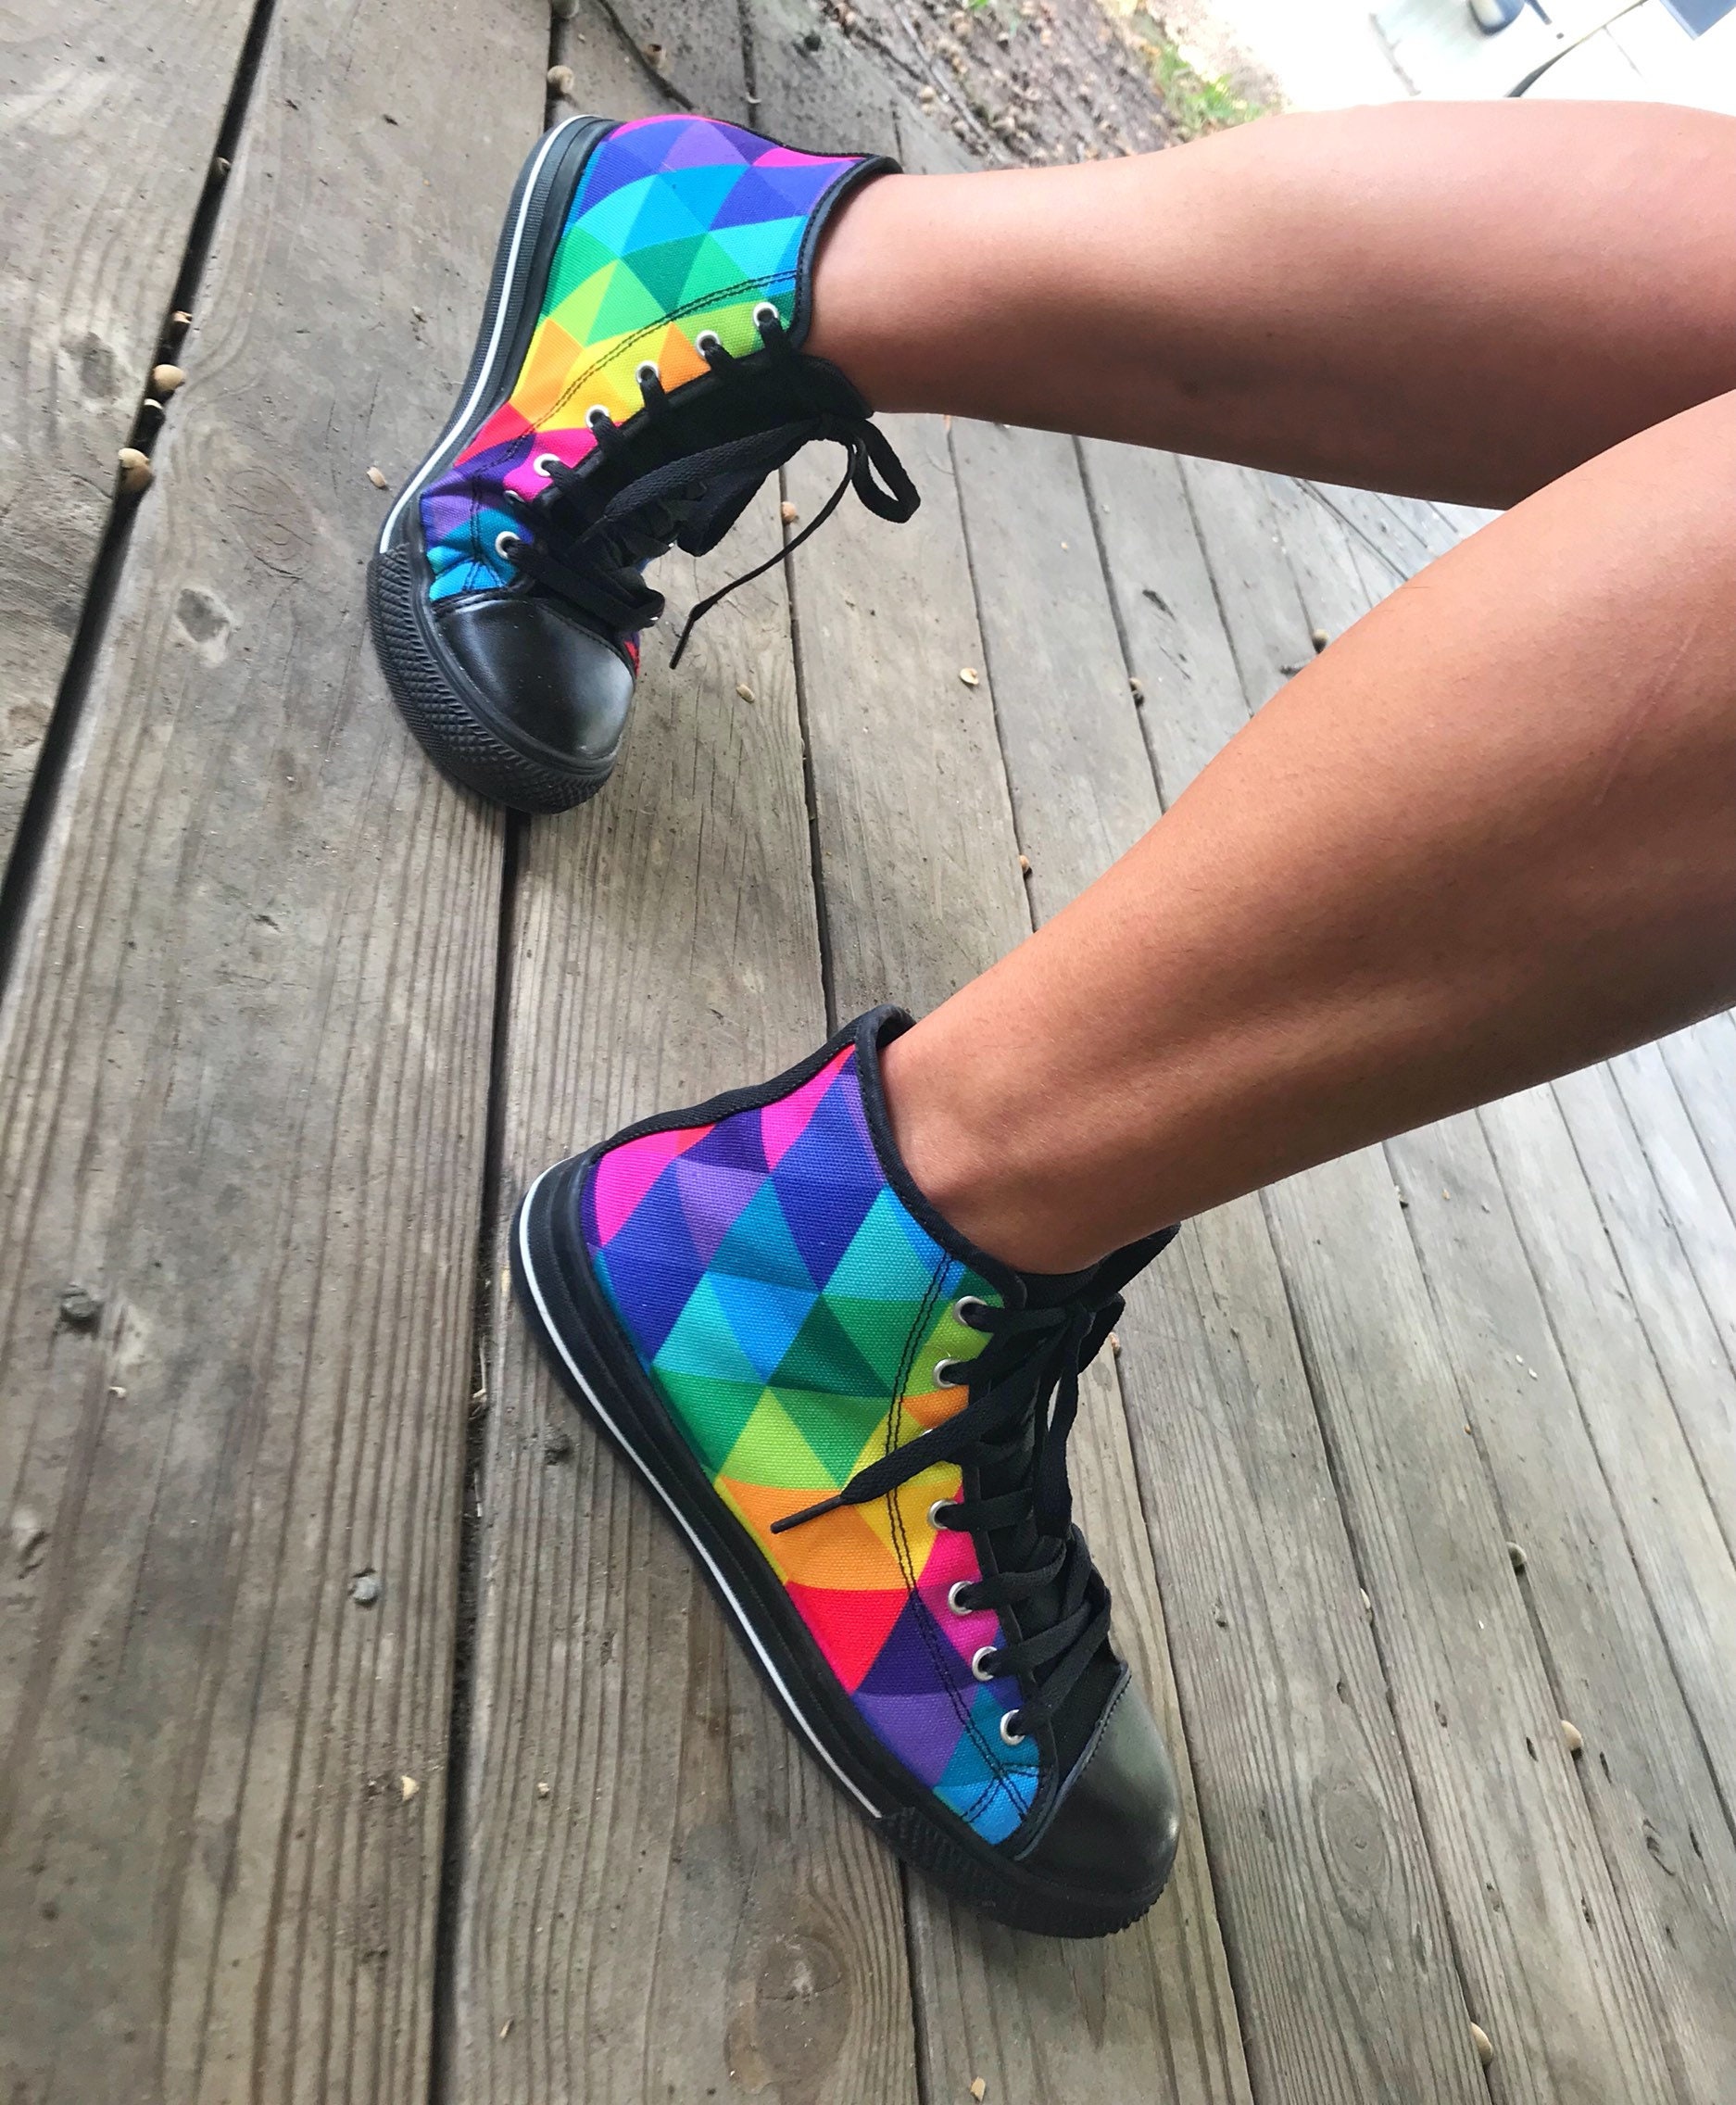 tang Mindre Barn WomenS HighTop Sneakers Colorful Rainbow Shoes Custom Canvas Design for Her  Your Magical Ruby Slippers